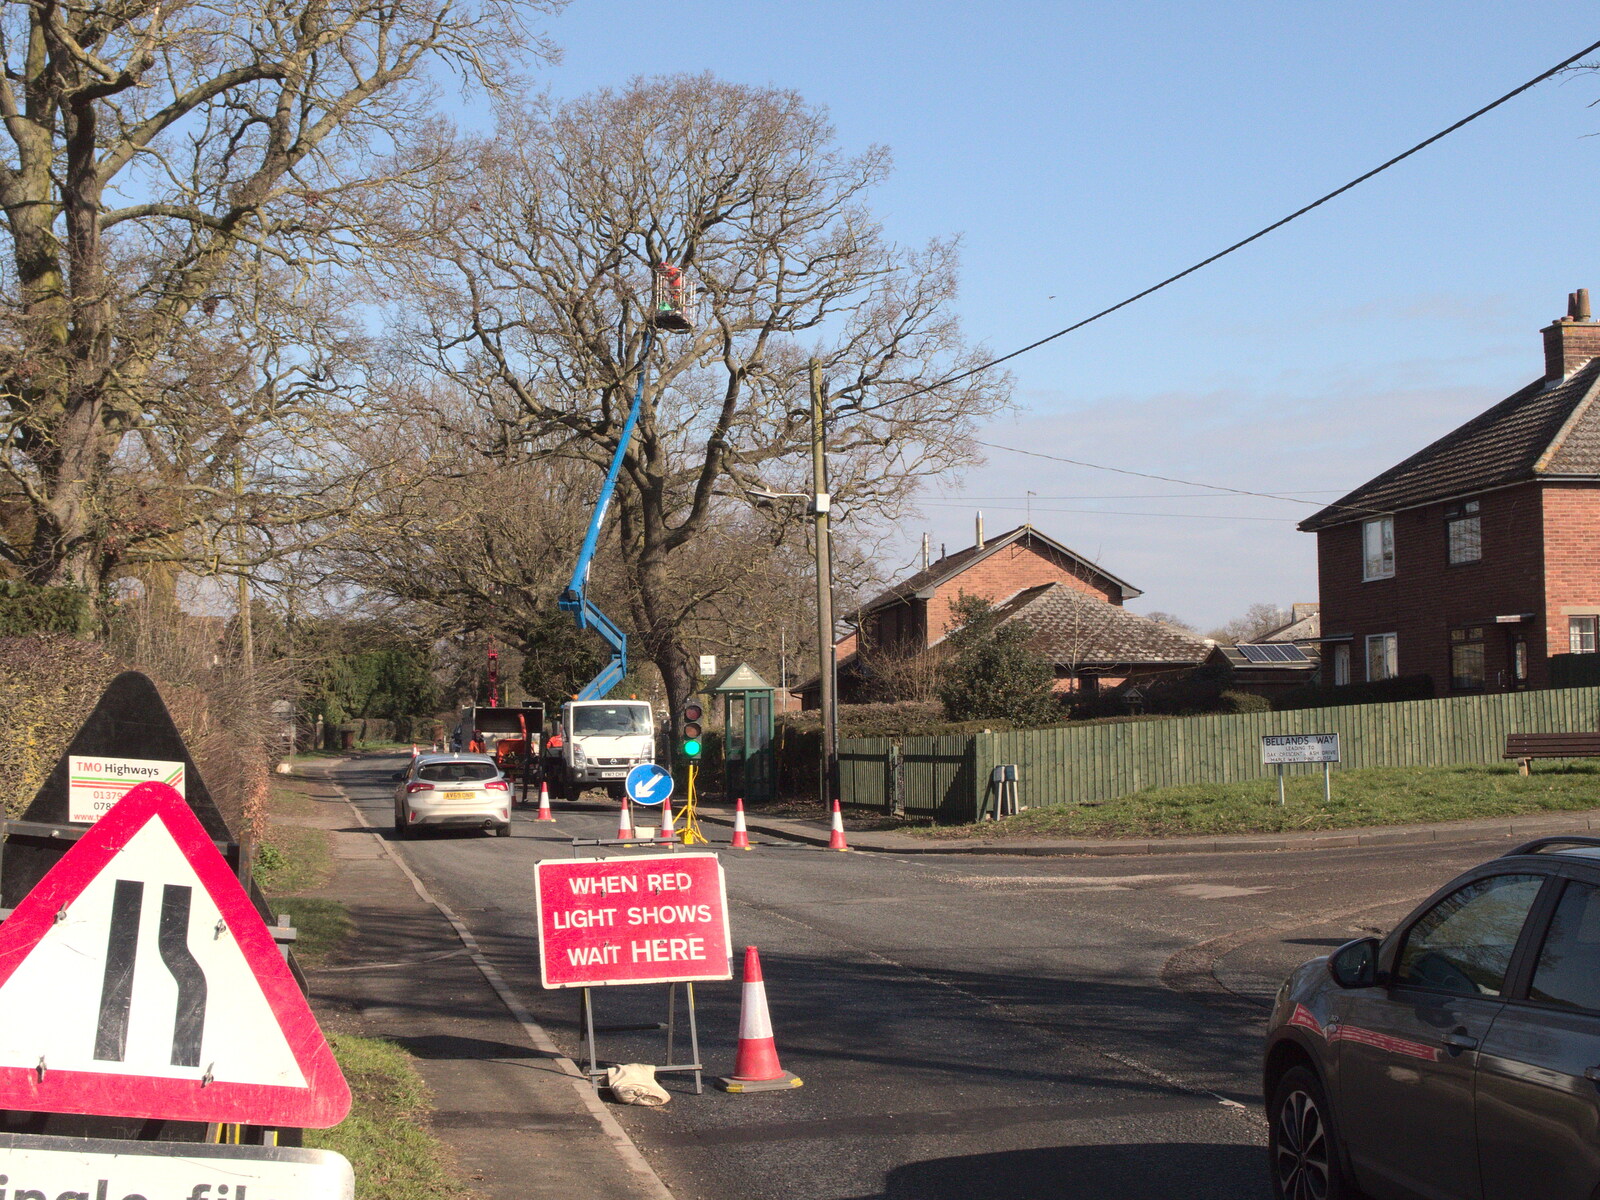 Some tree surgery is occuring near Bellands Way from A Vaccine Postcard from Harleston, Norfolk - 22nd March 2021